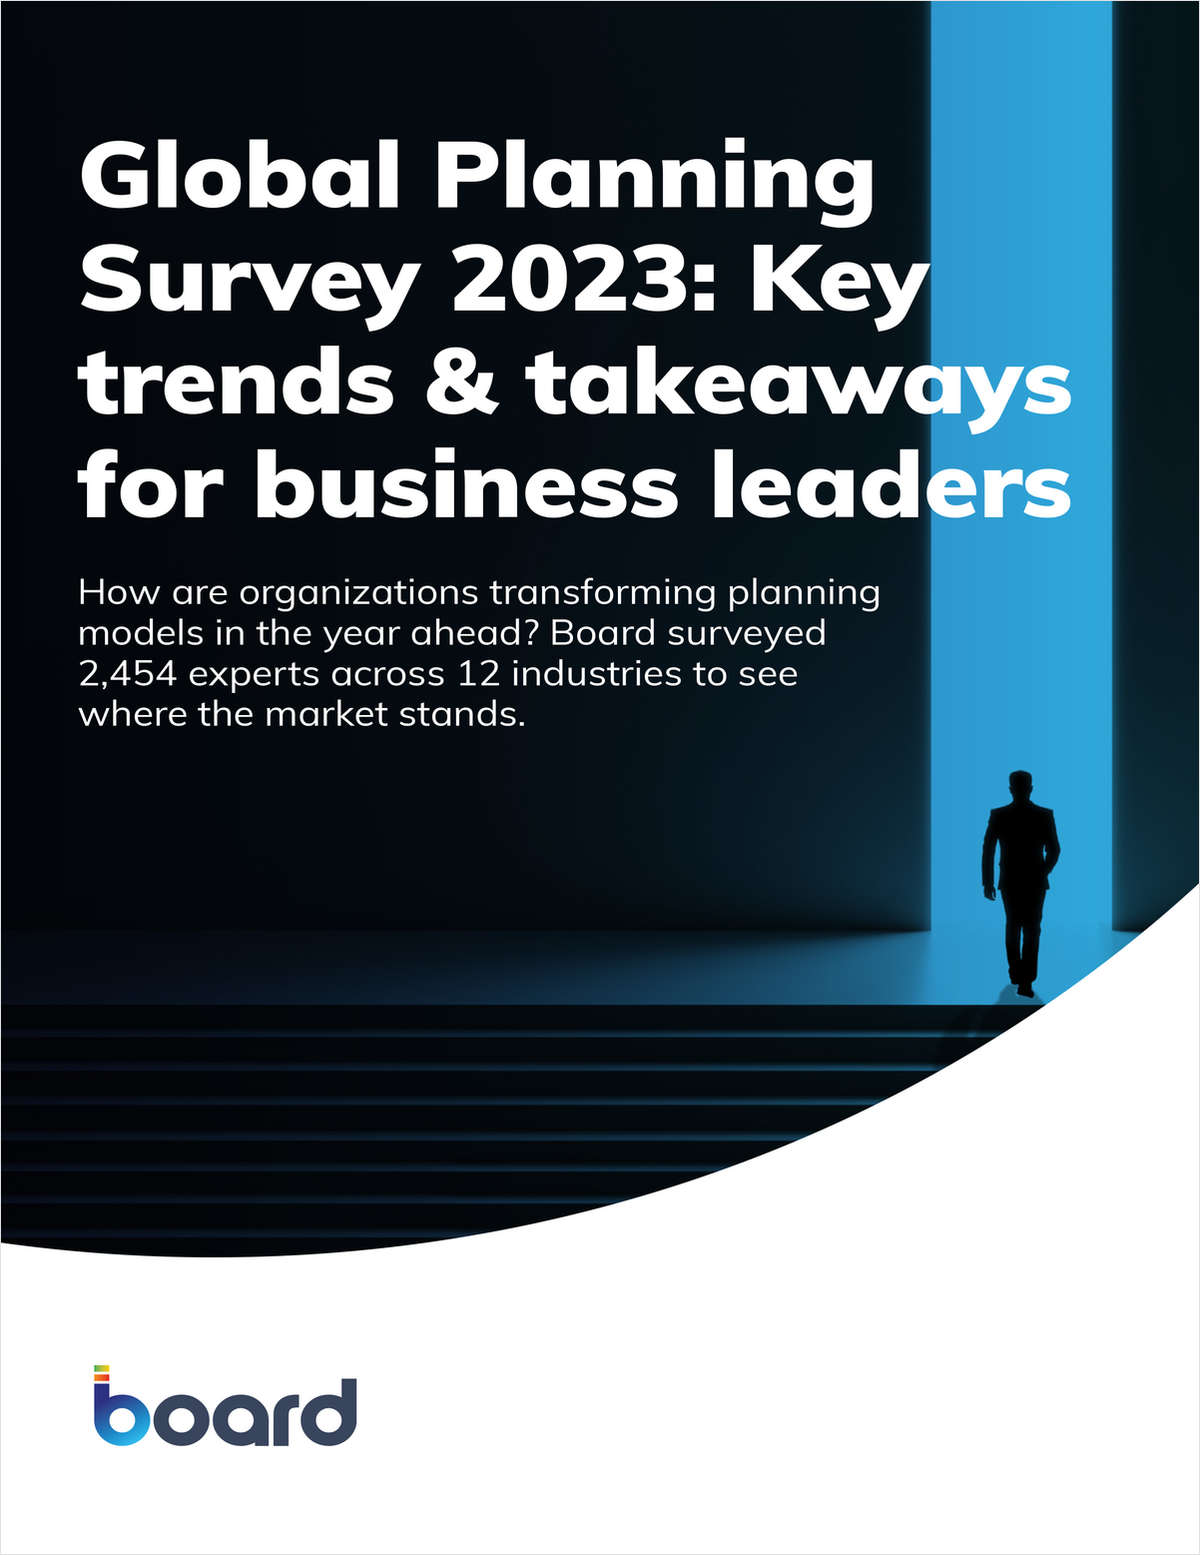 Global Planning Survey 2023: What do 2,454 industry experts say about the state of business planning?